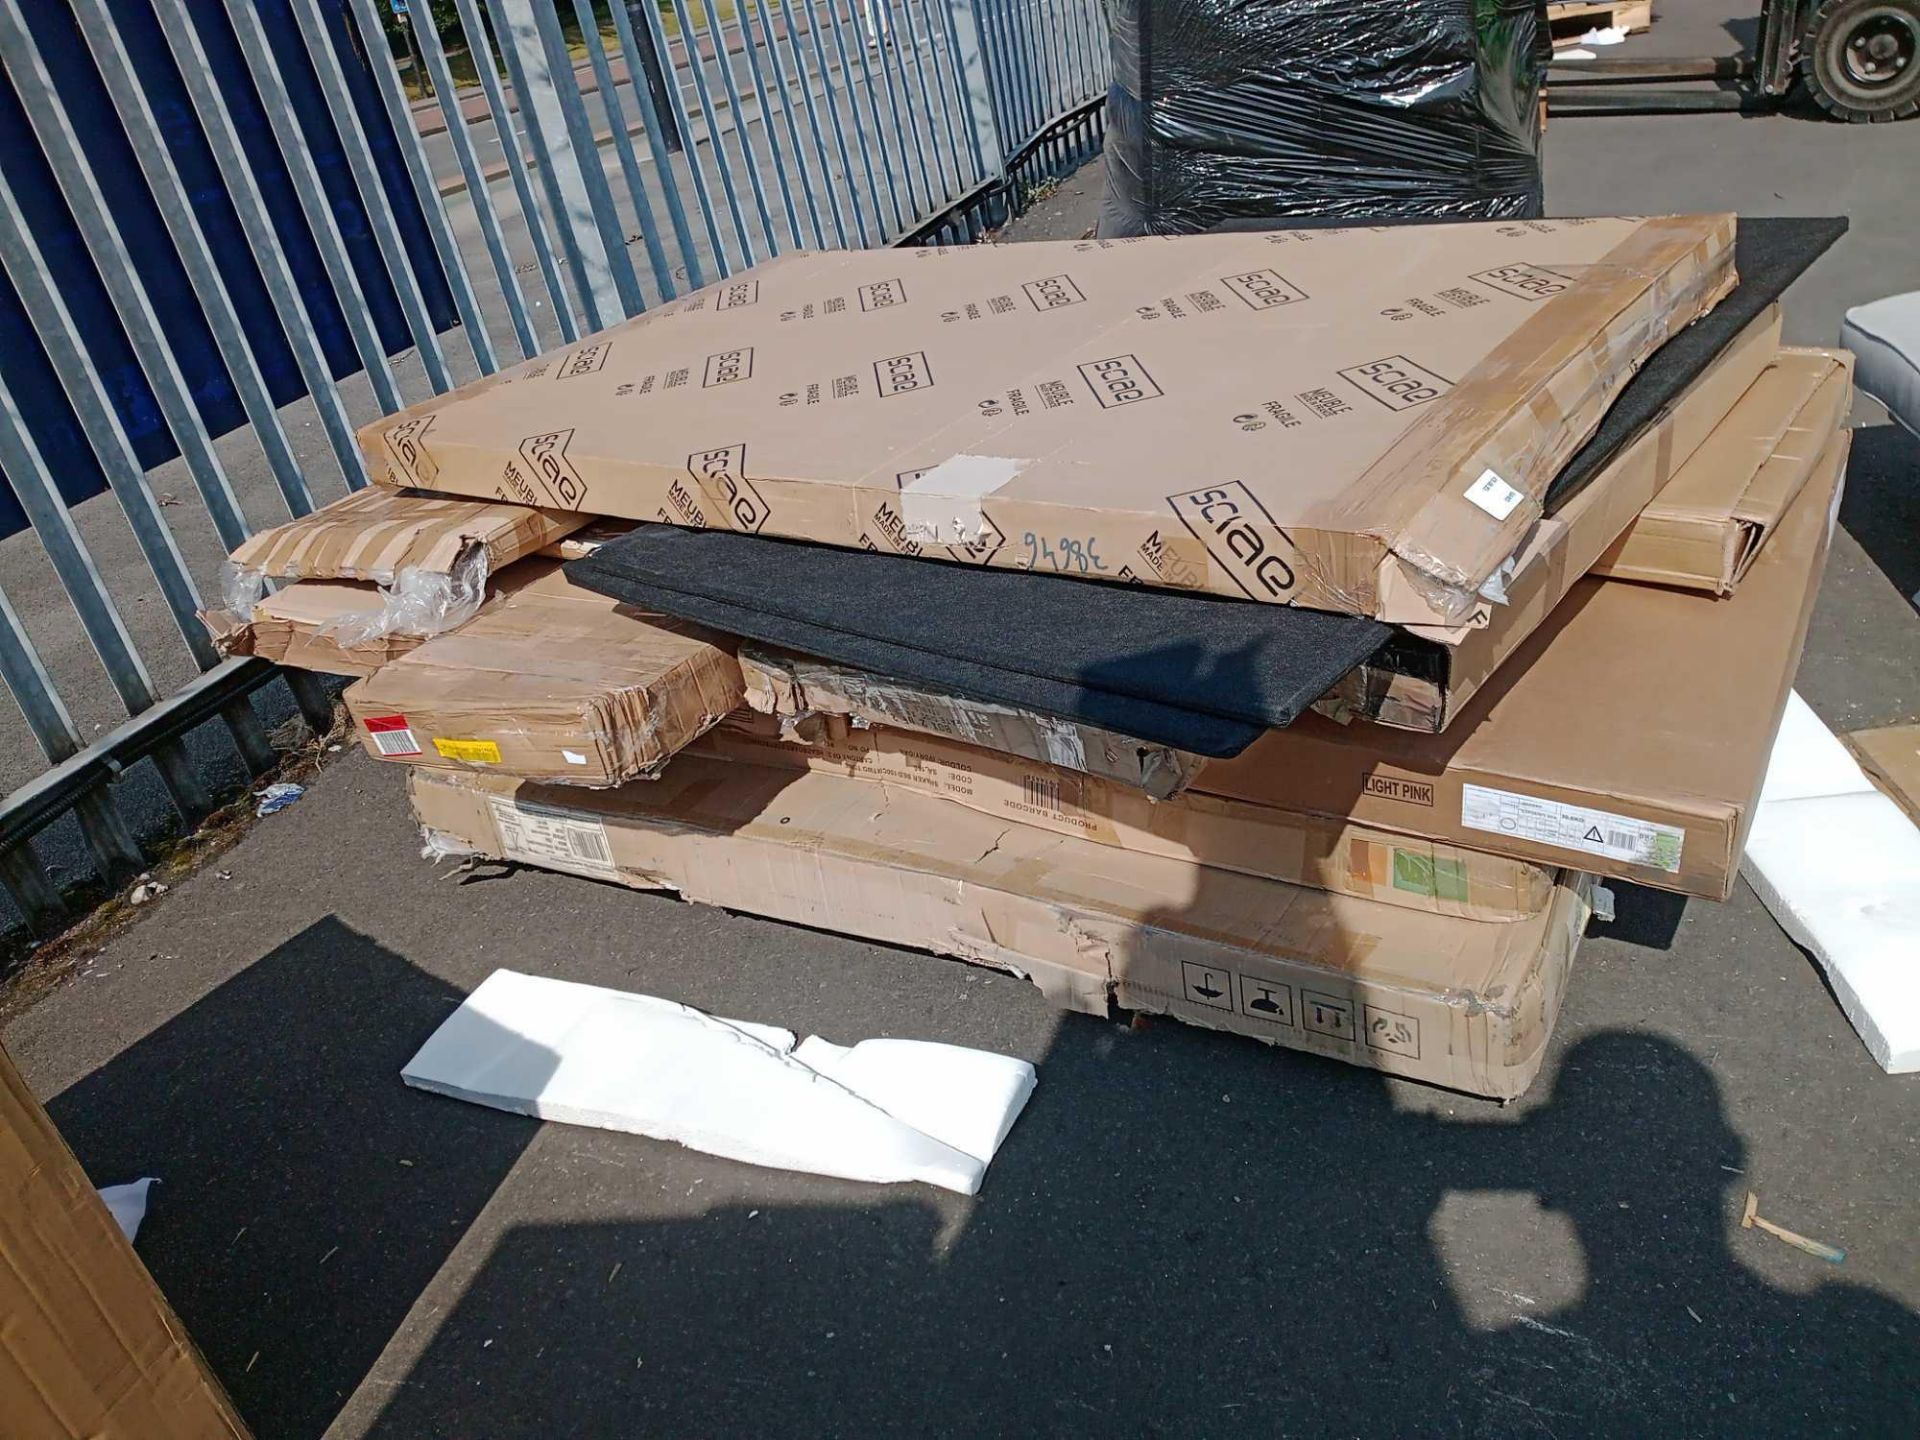 Pallet To Contain A Large Assortment Of Flatpack Furniture Part Lots - Image 2 of 2